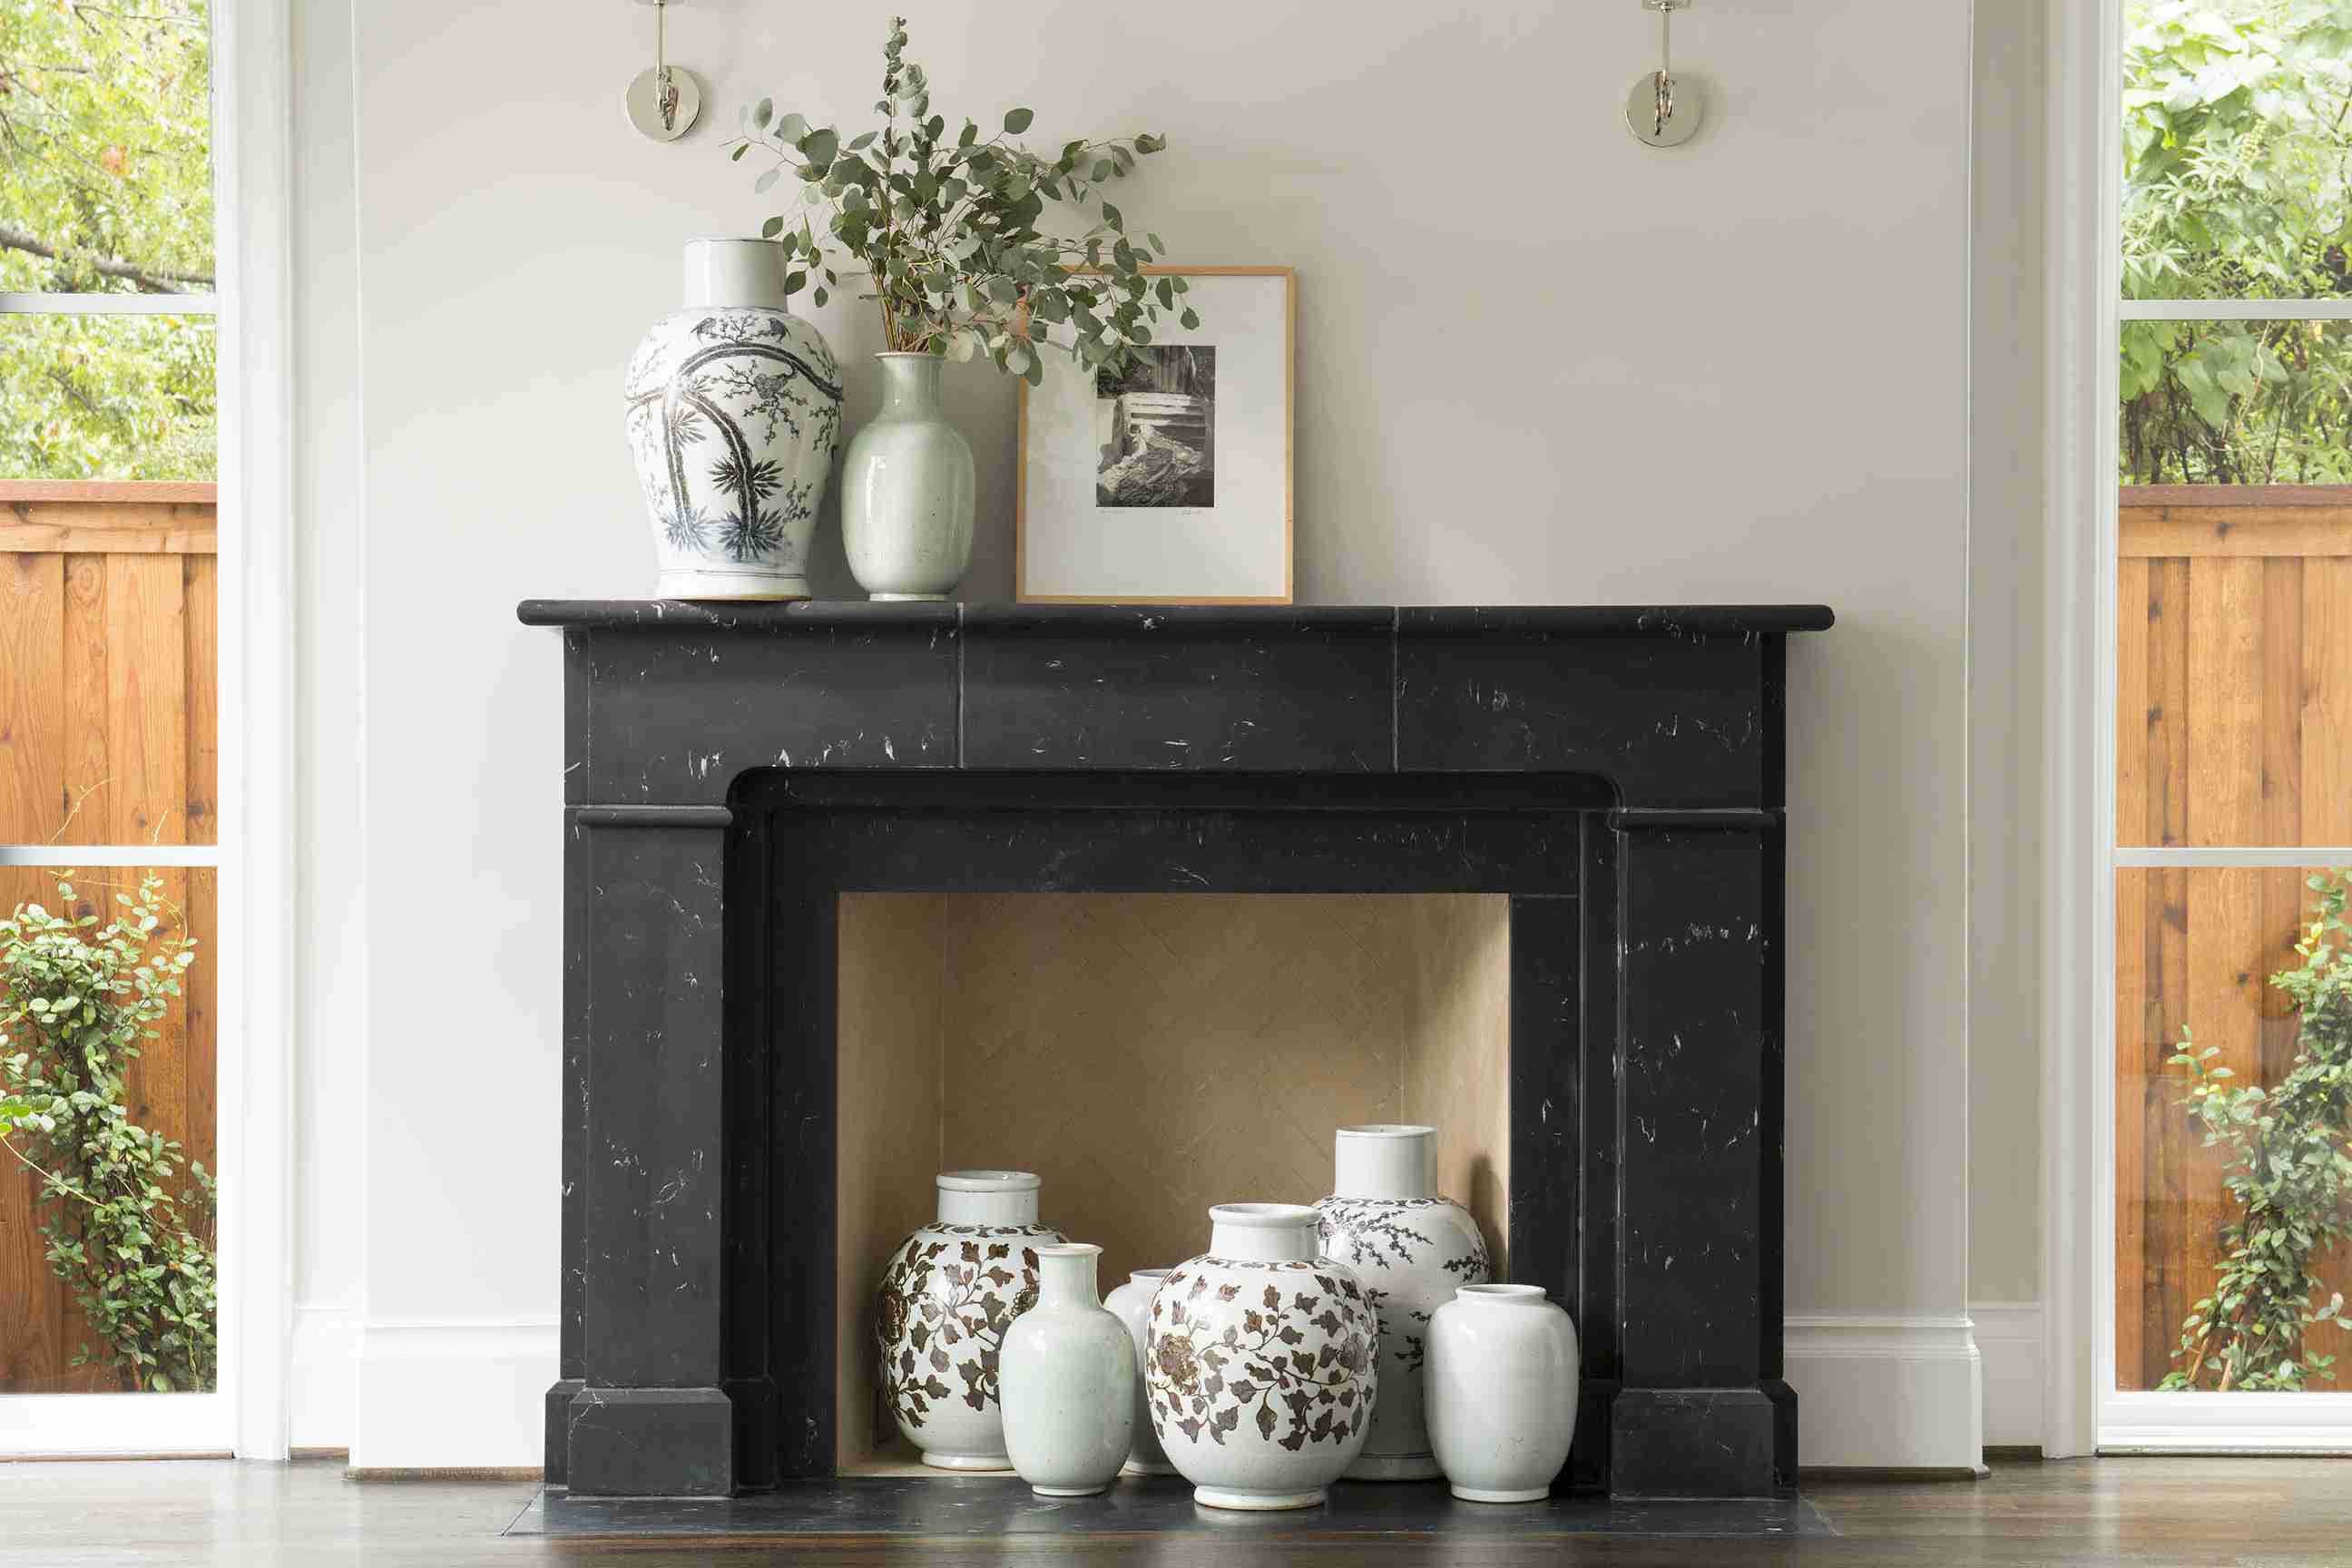 What to Put On A Fireplace Mantel Awesome 18 Stylish Mantel Ideas for Your Decorating Inspiration